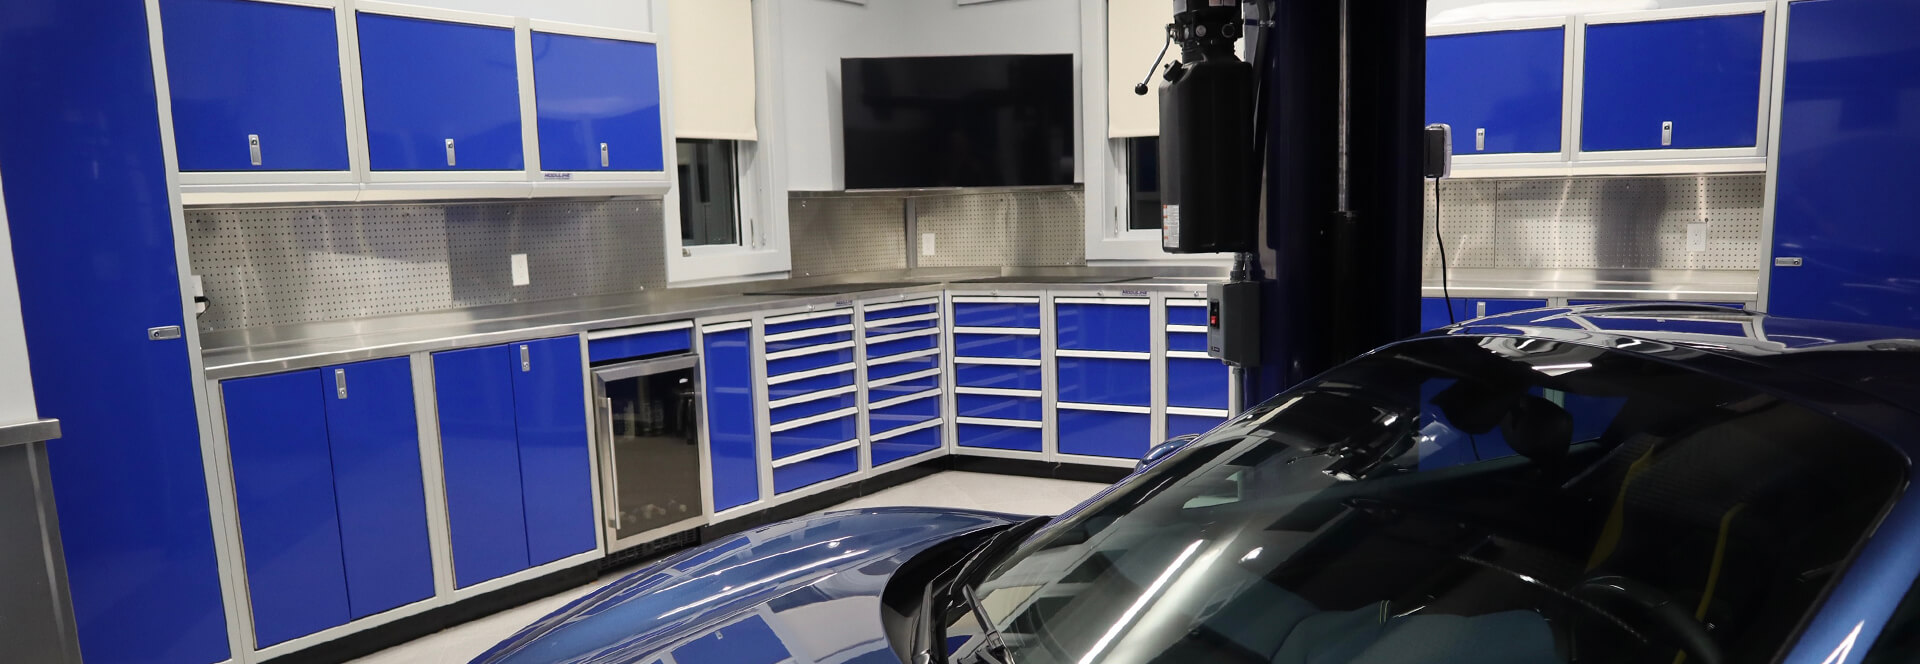 The Best In Personalized Garage Cabinets Systems